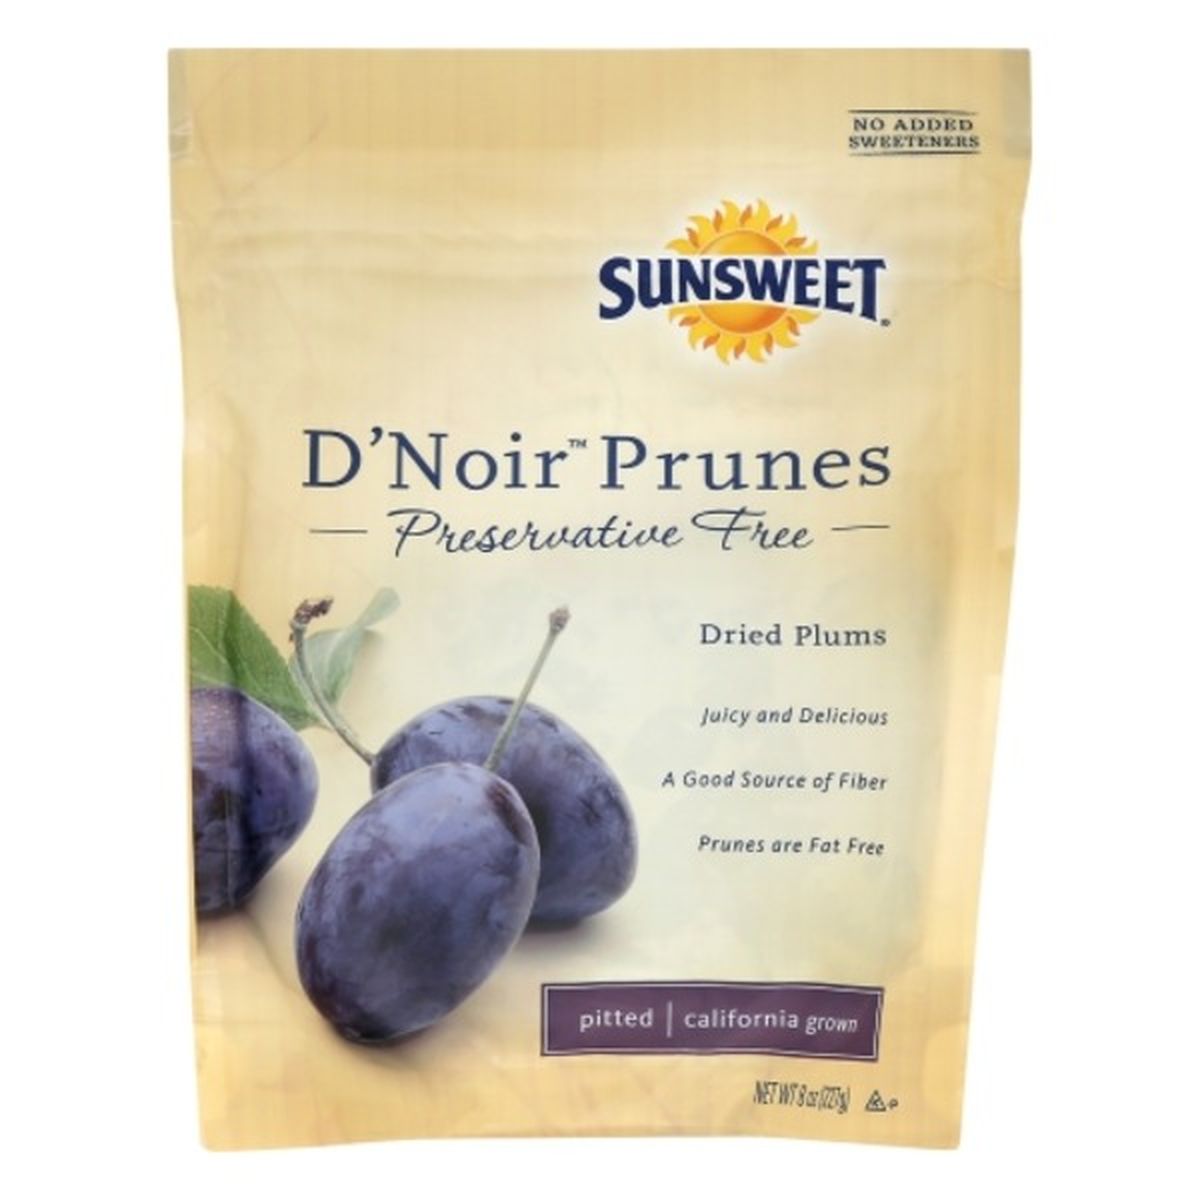 Calories in Sunsweet Prunes, D'Noir, Pitted